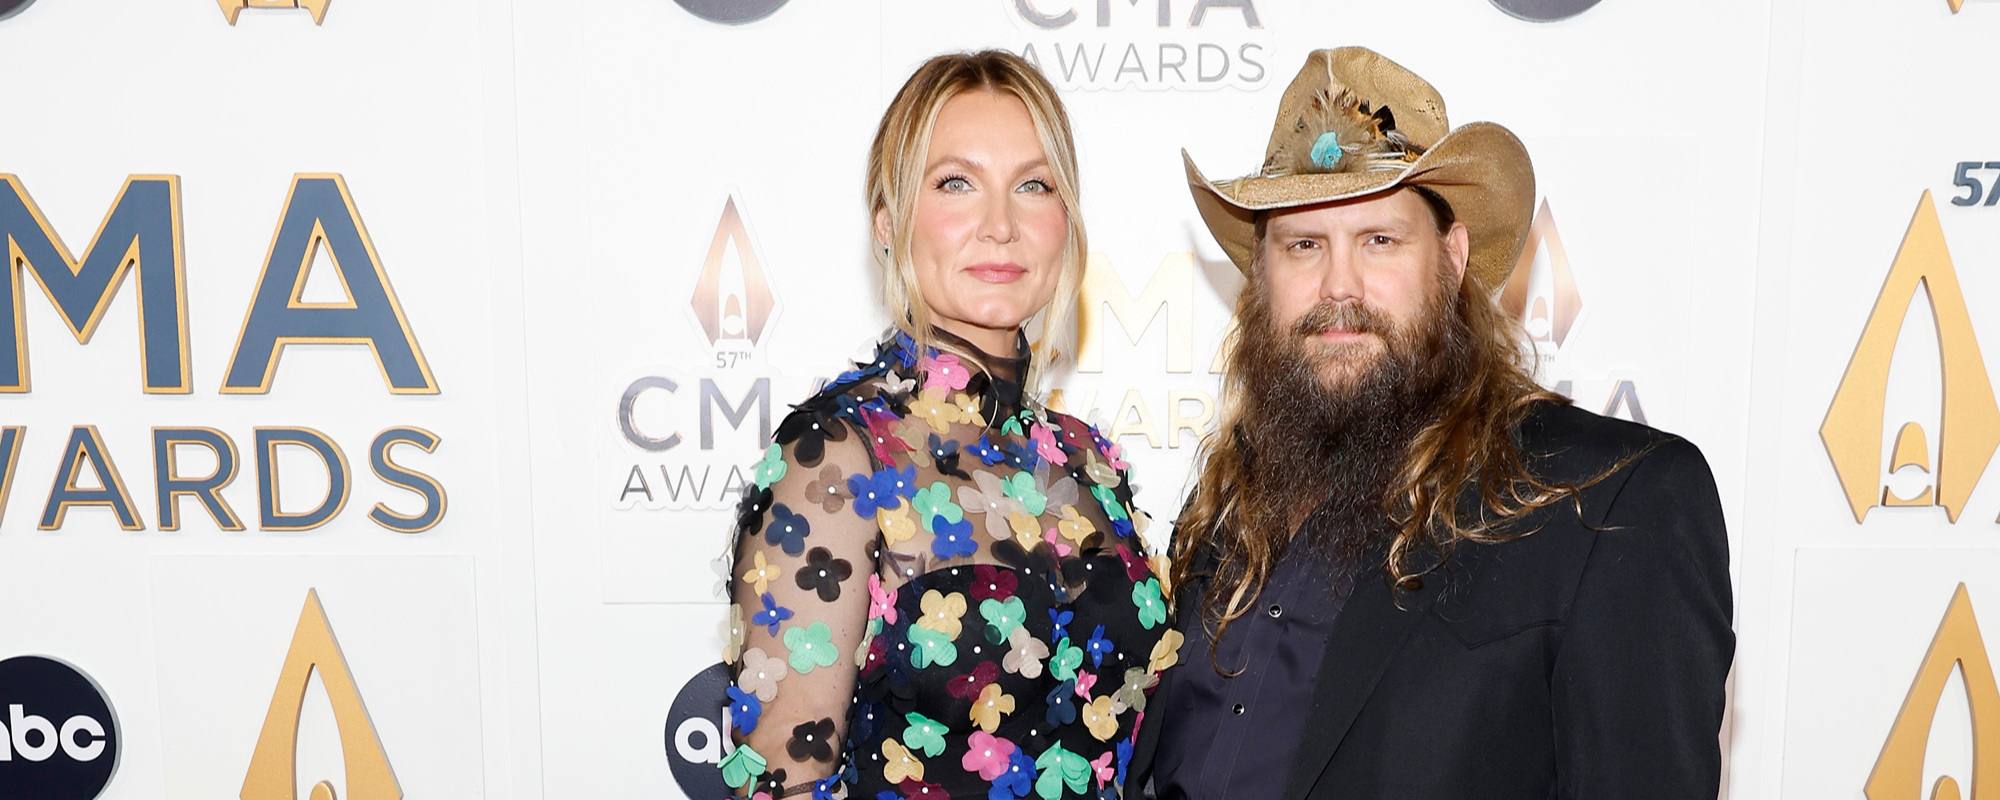 The Tune About Temptation Morgane Stapleton Championed Till It Made the Record: The Meaning Behind Chris Stapleton’s “You Should Probably Leave”